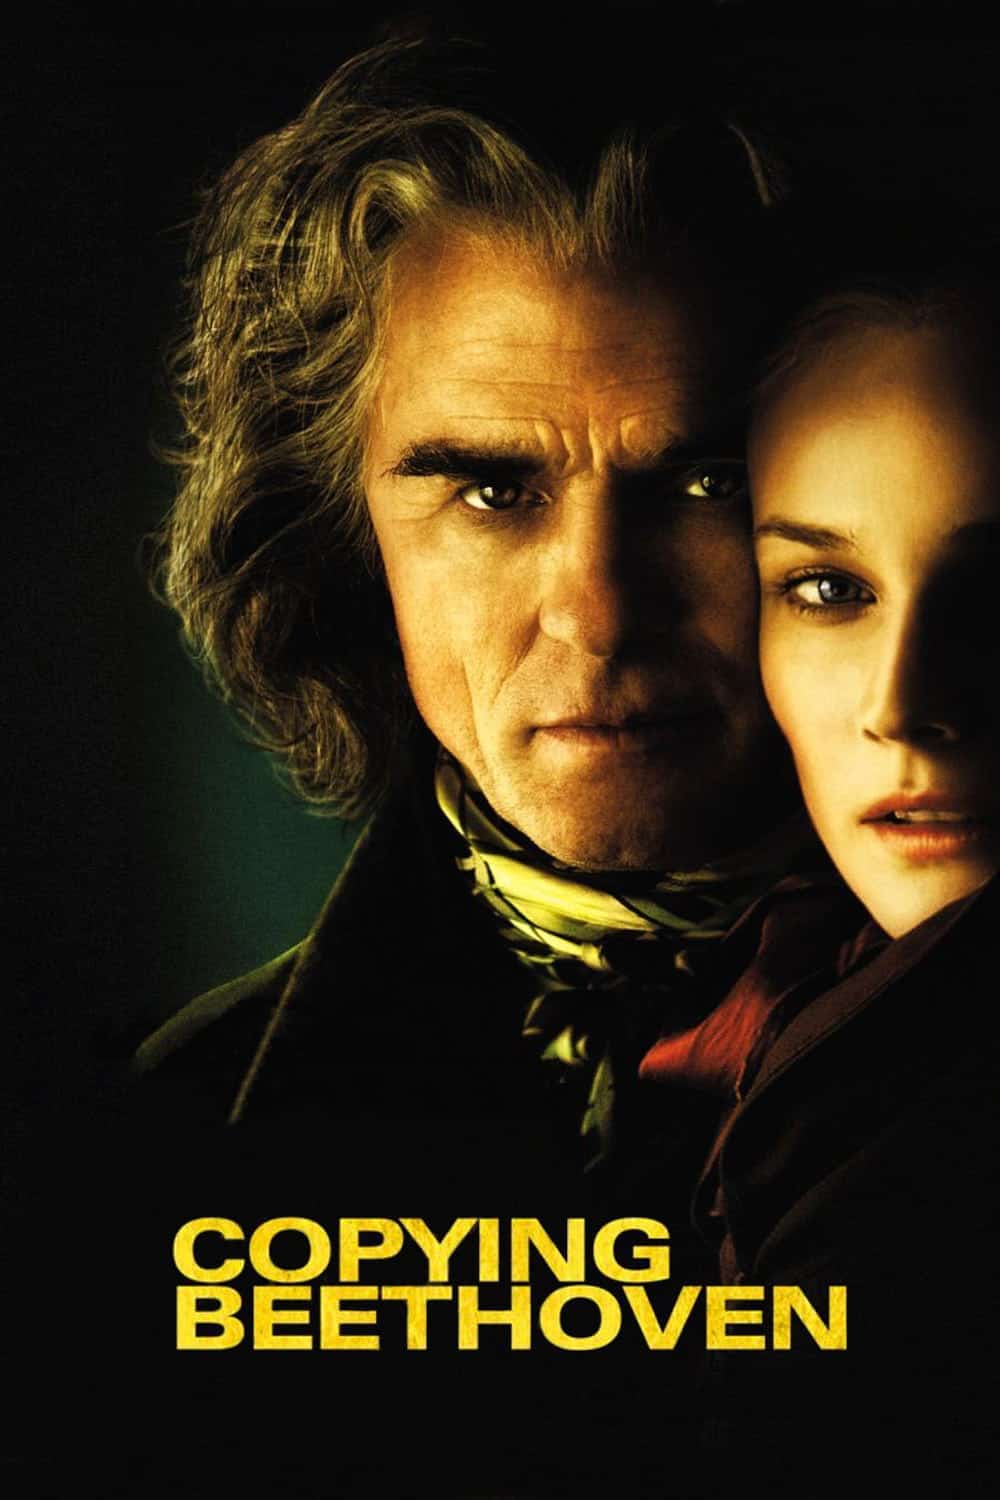 Copying Beethoven, 2006 